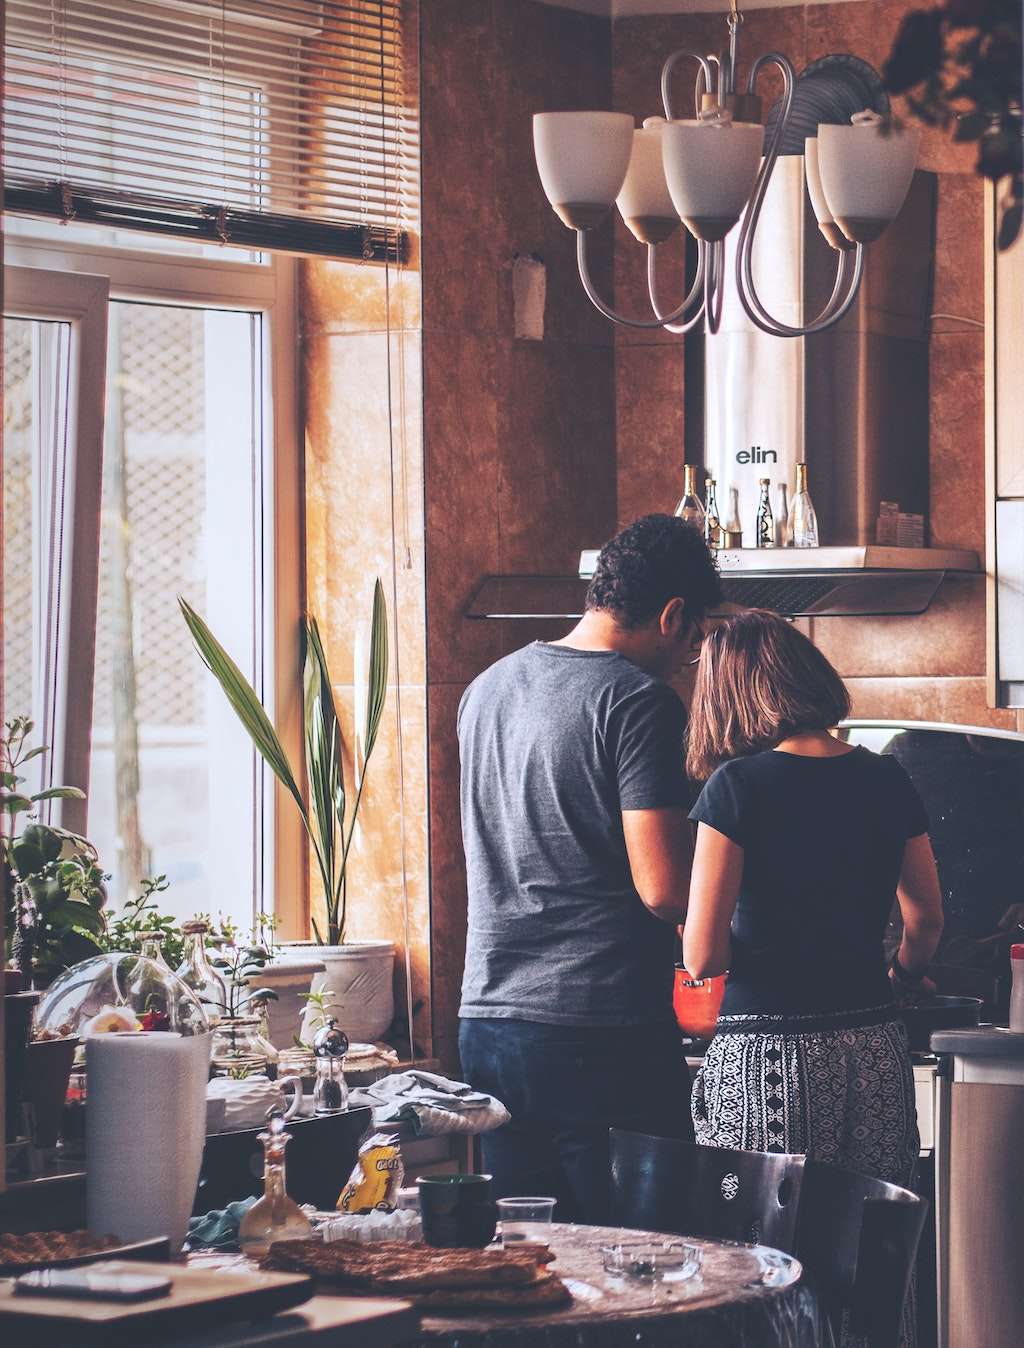 couple cooking in kitchen